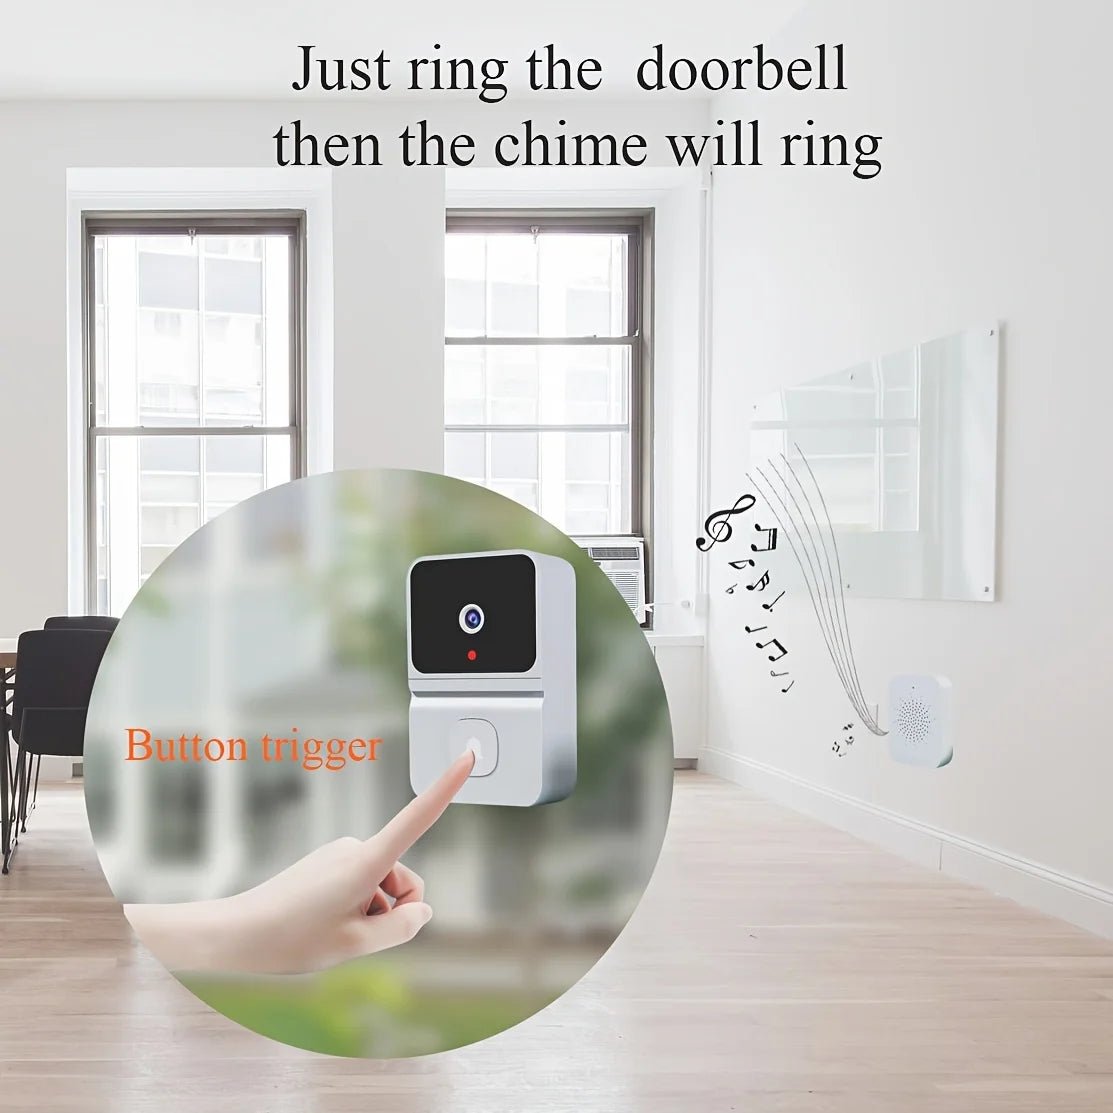 T23 Smart Visual Doorbell Two - way Intercom Infrared Night Vision Remote Monitoring Security System Wifi Video Door Bell - Amazing Gadgets Outlet